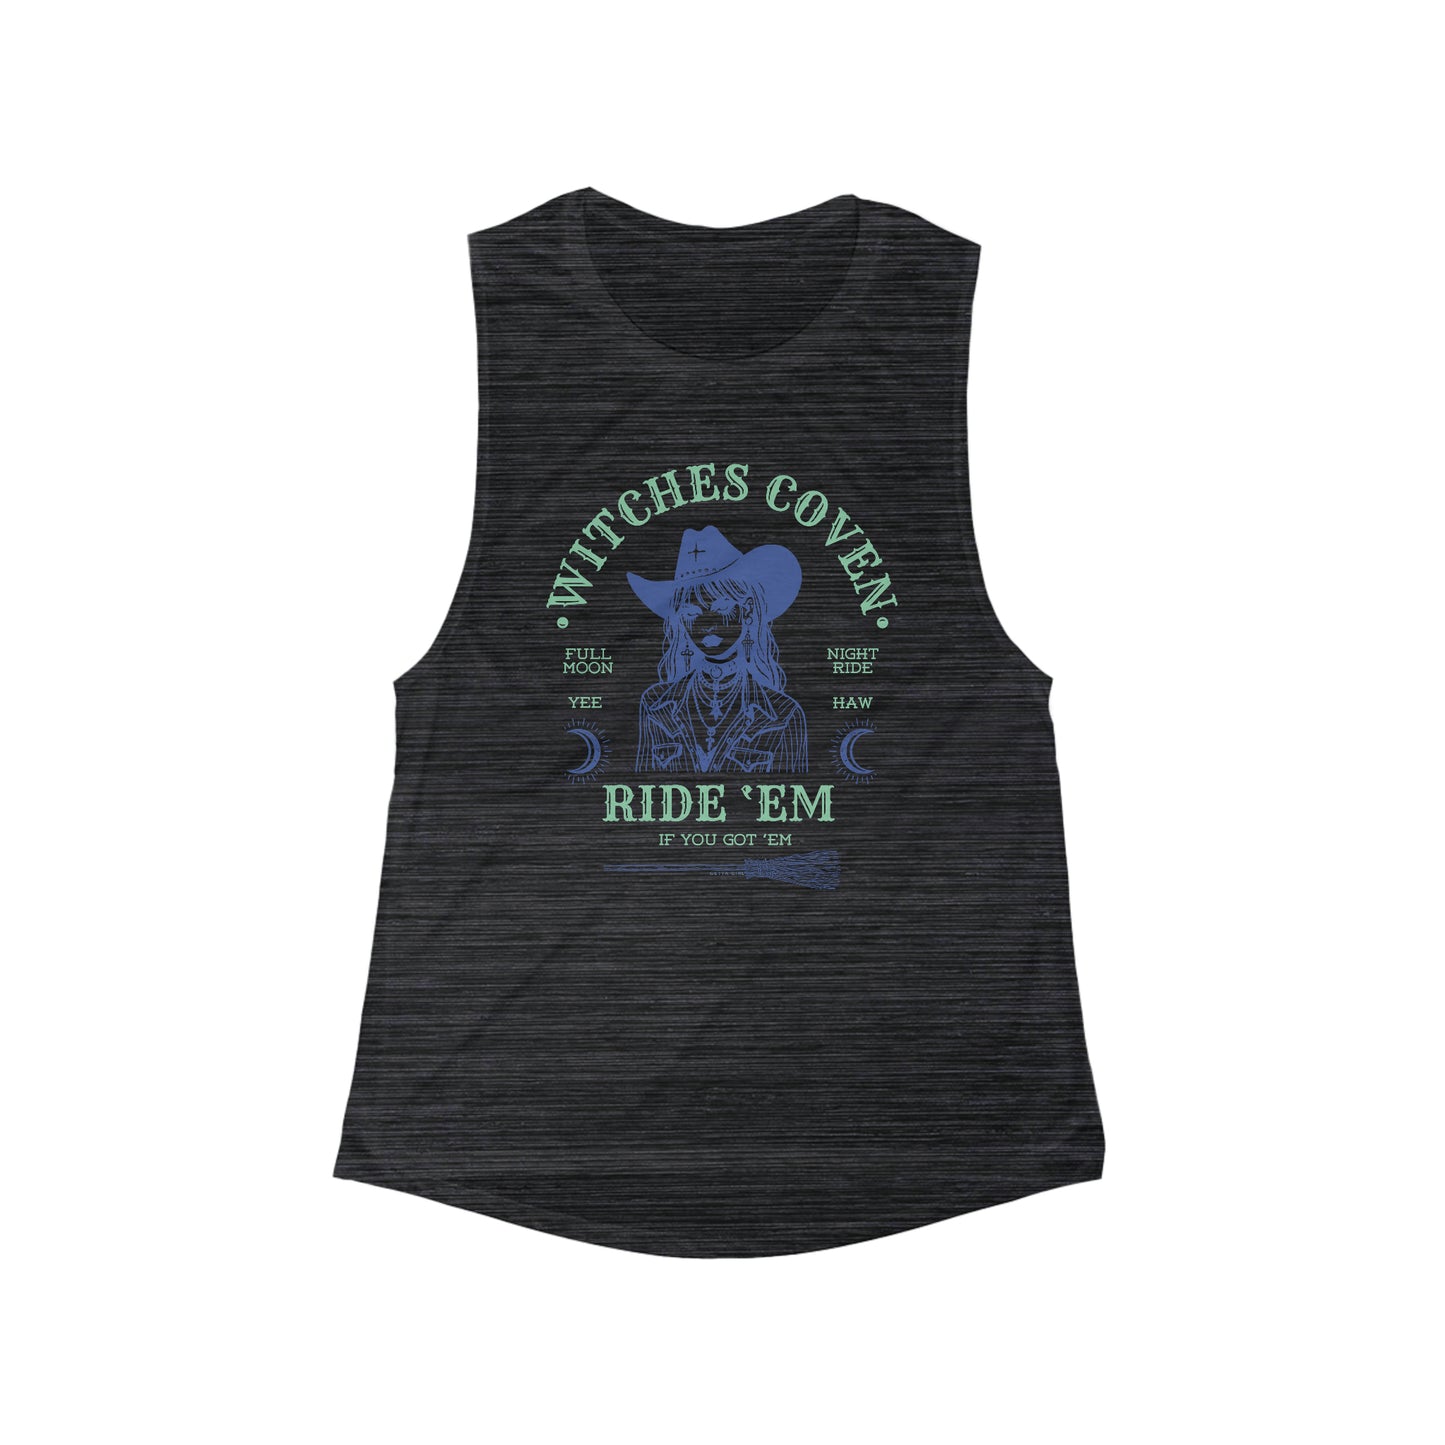 WITCHES COVEN RIDE 'EM Women's Flowy Scoop Muscle Tank: Women's Fitness Tank